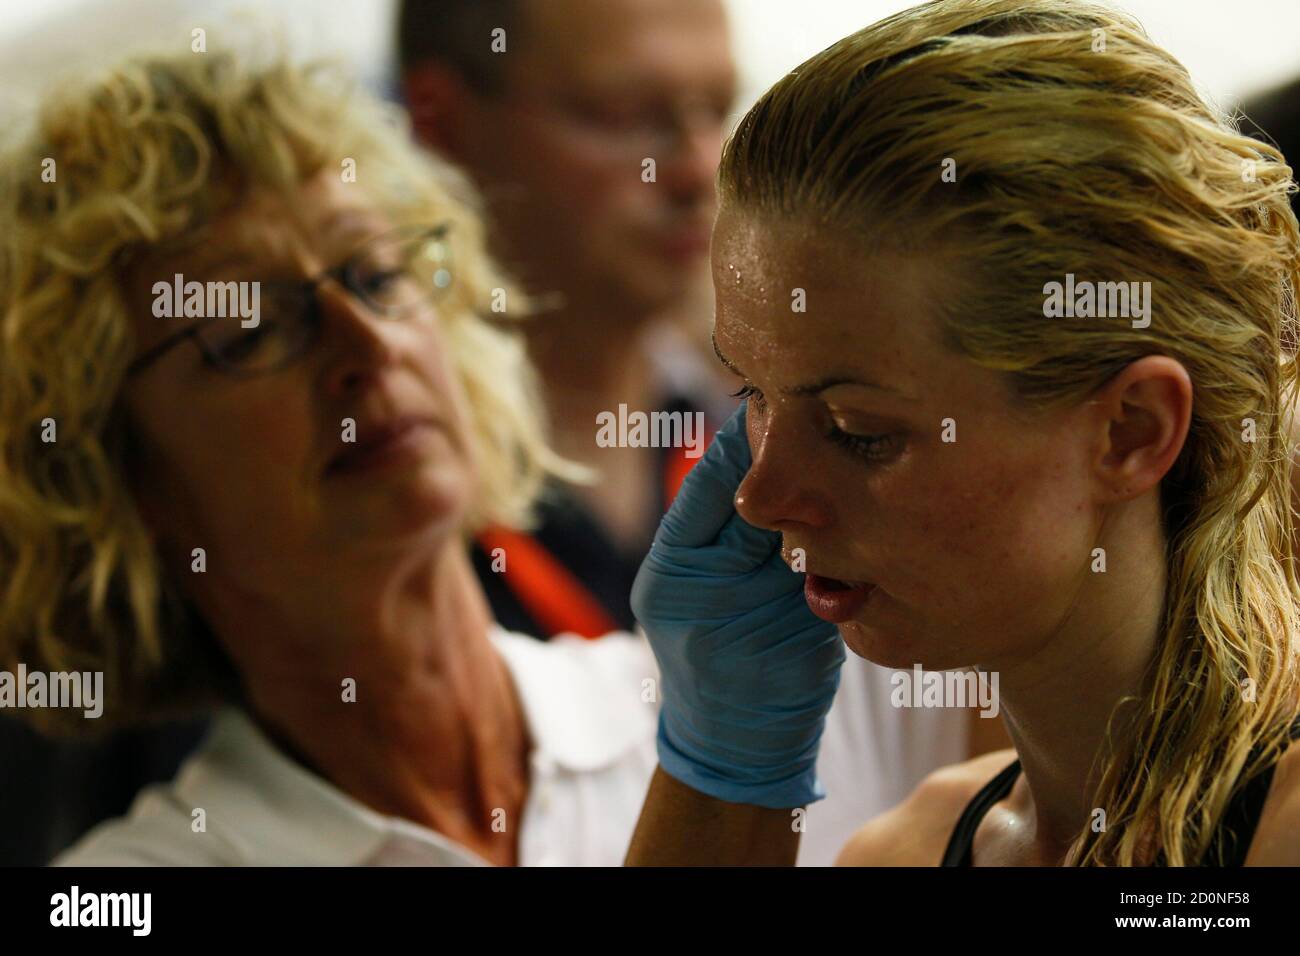 Germany's Britta Steffen is lactate tested after winning the women's 50m freestyle finals at the German Swimming Championships in Berlin June 5, 2011. REUTERS/Wolfgang Rattay (GERMANY - Tags: SPORT SWIMMING) Stock Photo